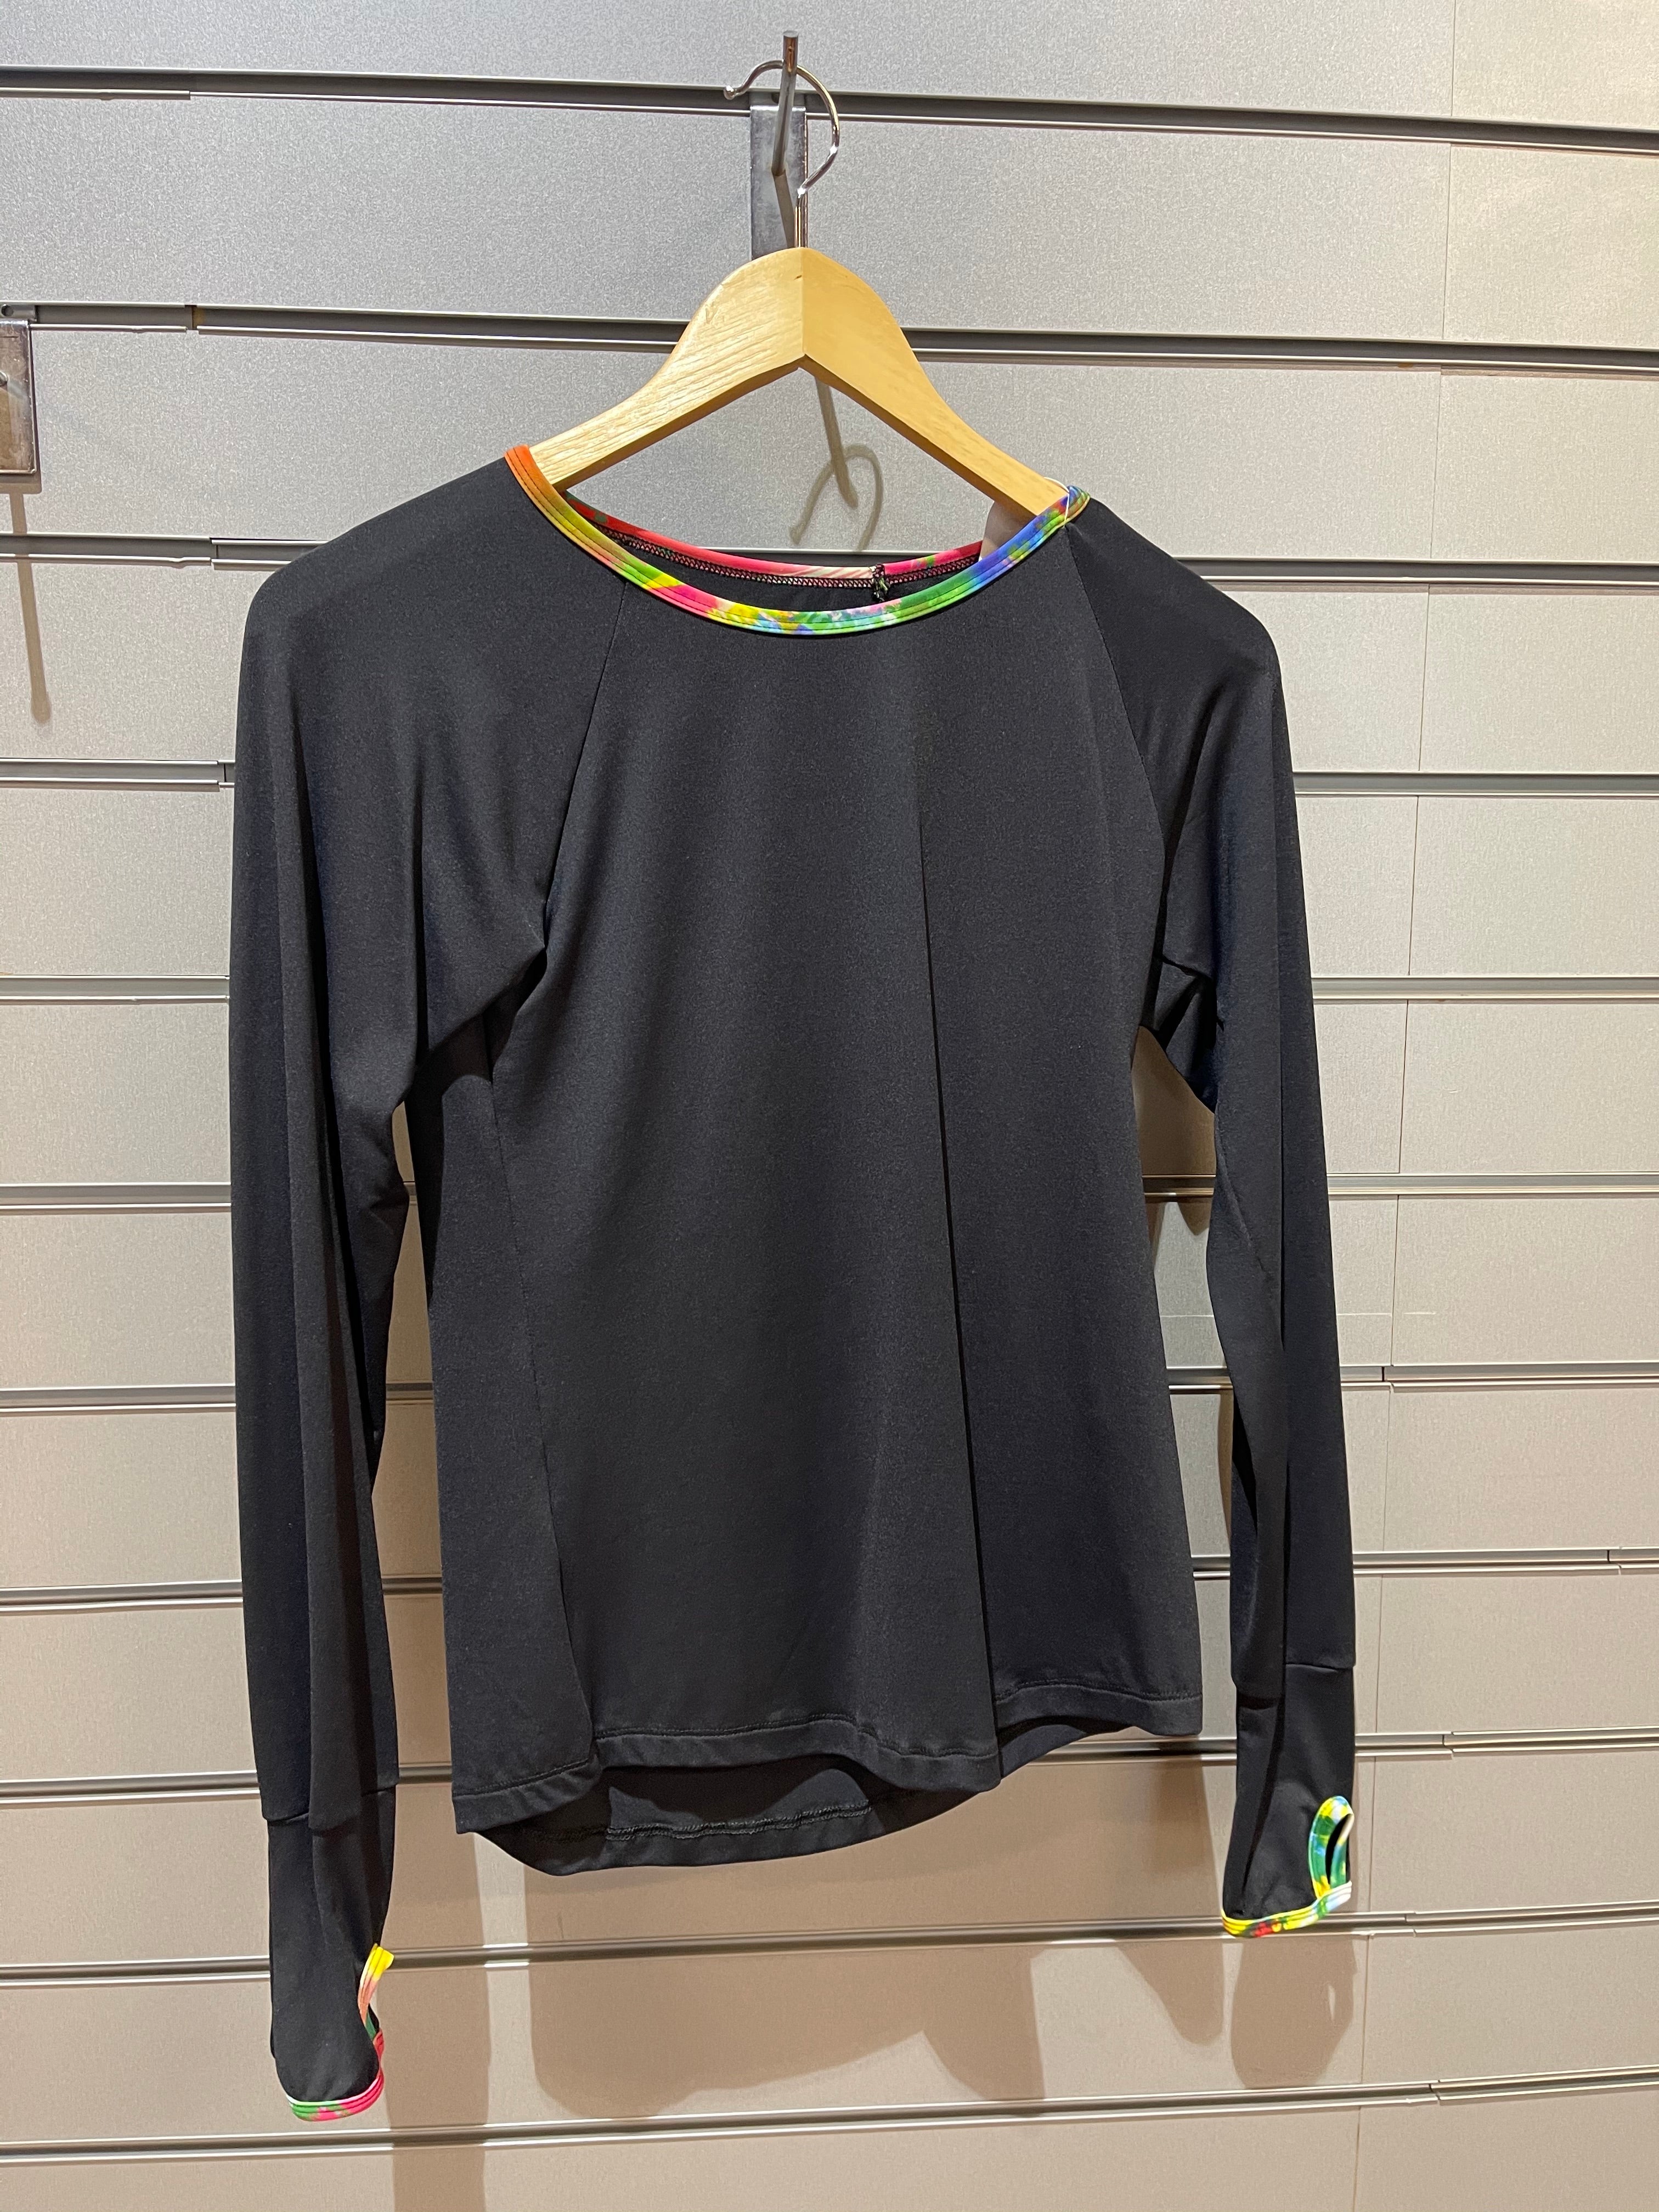 Long Sleeved Skating Top by Gees Active Size 34"